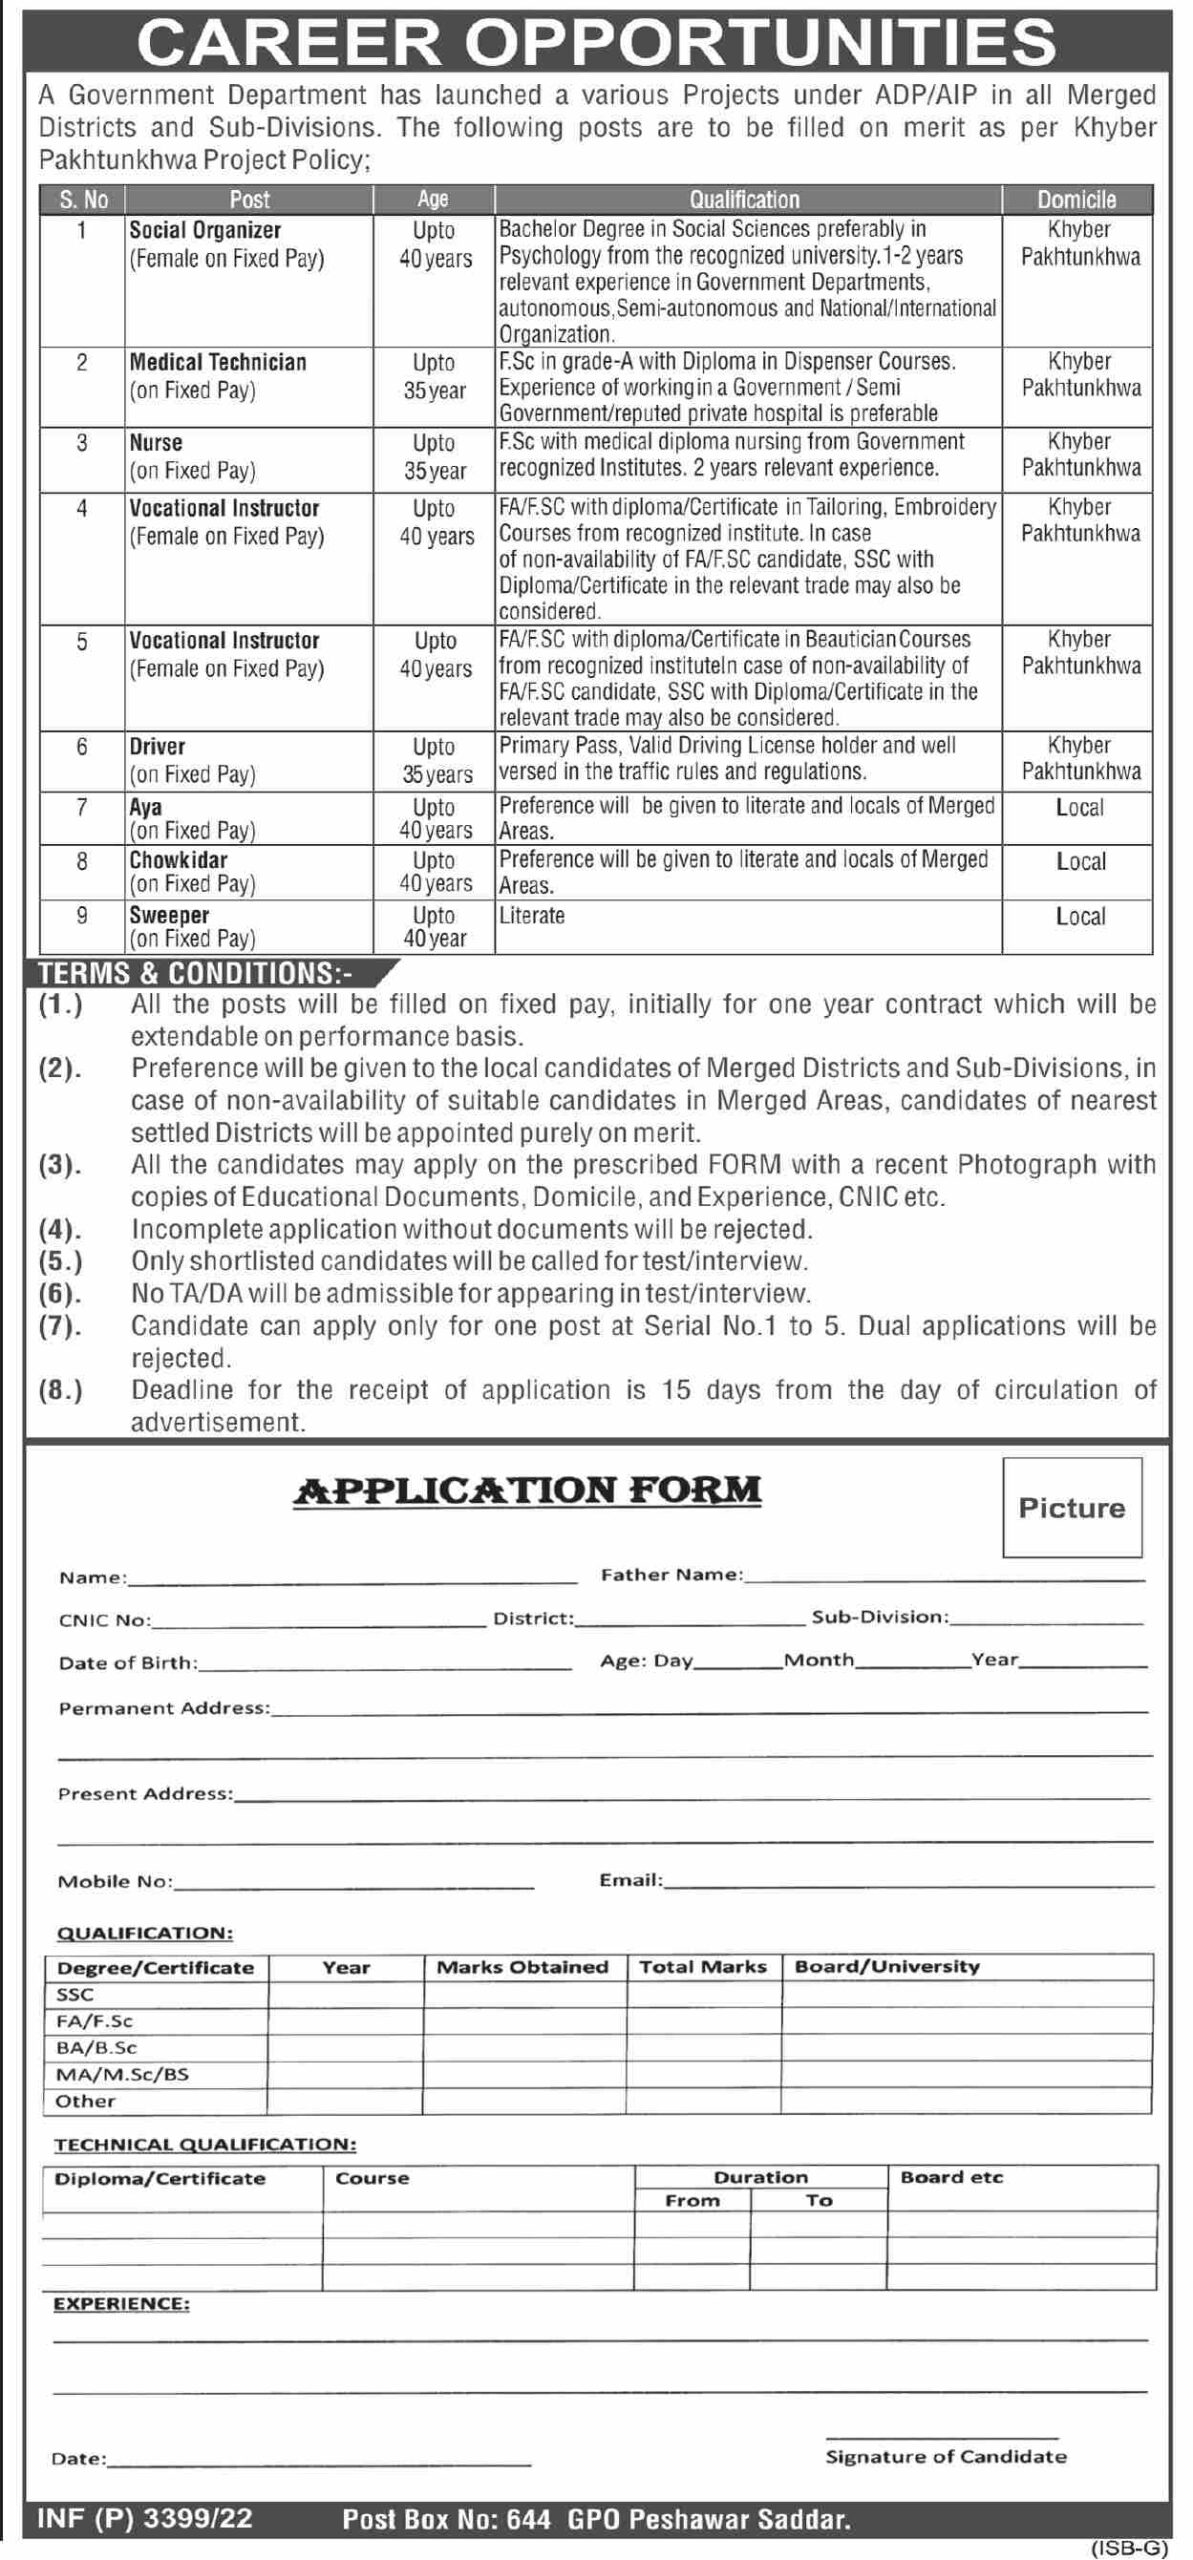 National Organization Jobs 2022 in Health Projects in KPK / PO Box 118